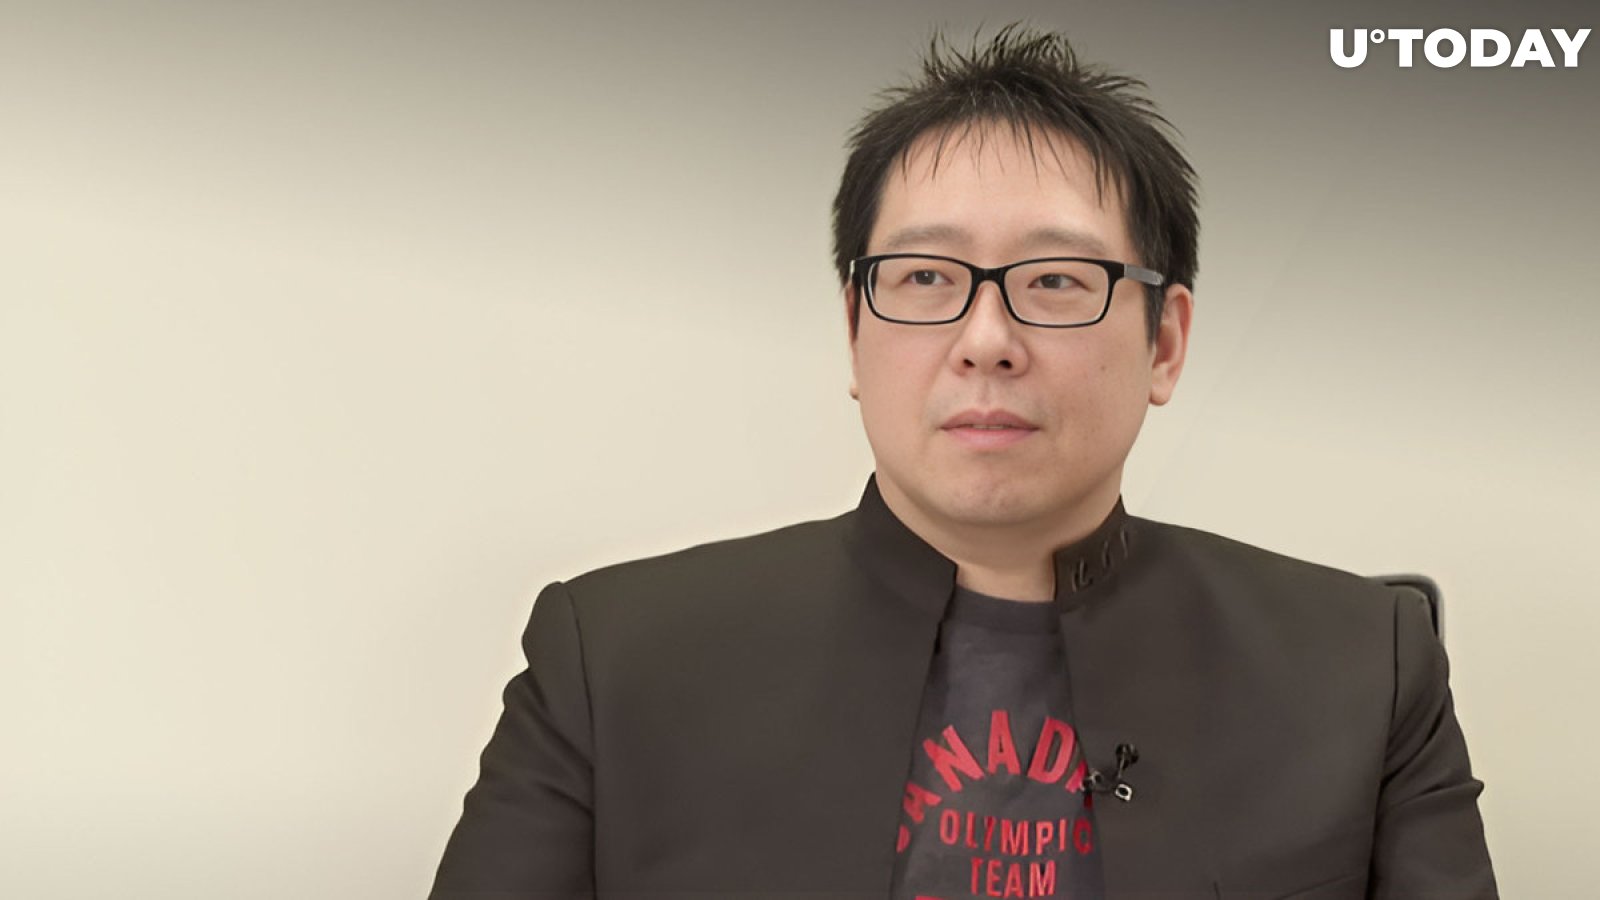 Bitcoiner Samson Mow criticizes Ripple for spreading FUD about Bitcoin and Tether